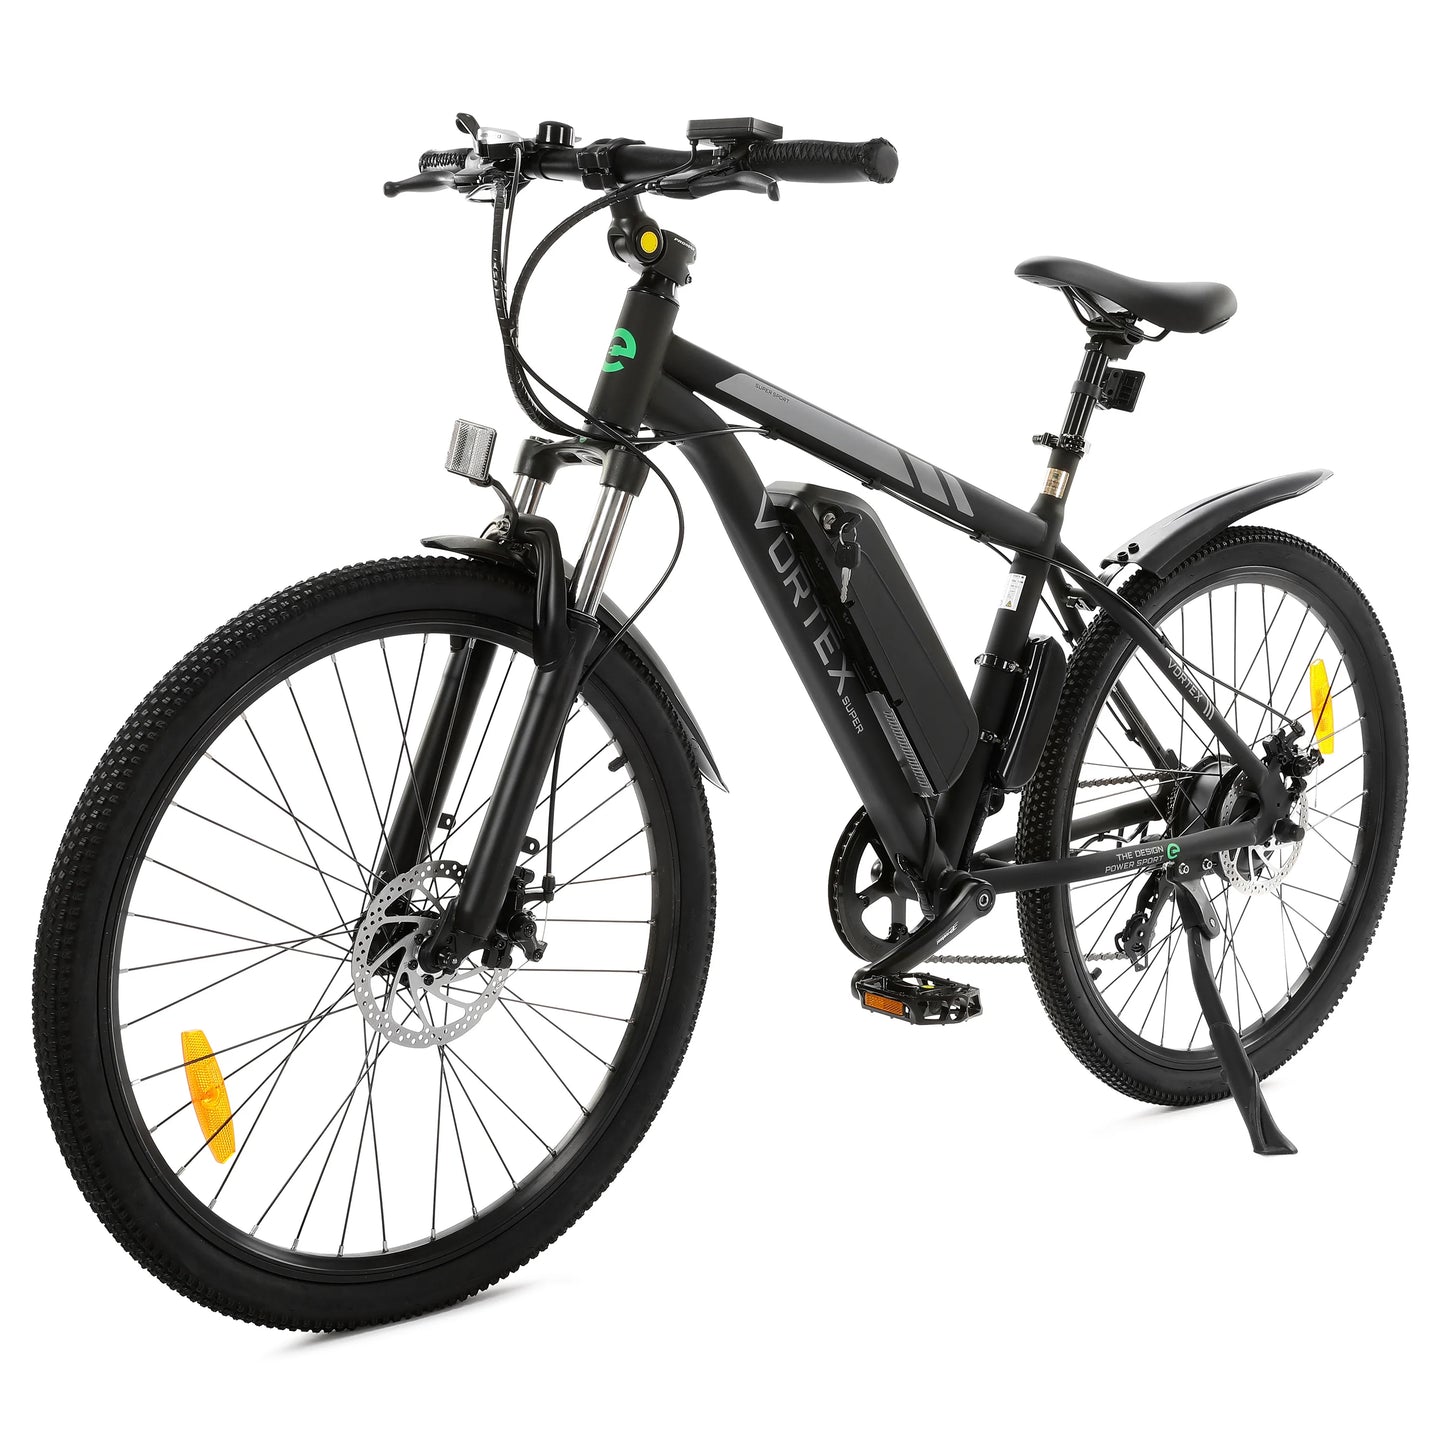 UL Certified-Ecotric Vortex Electric City Bike, Top Speed: 20MPH